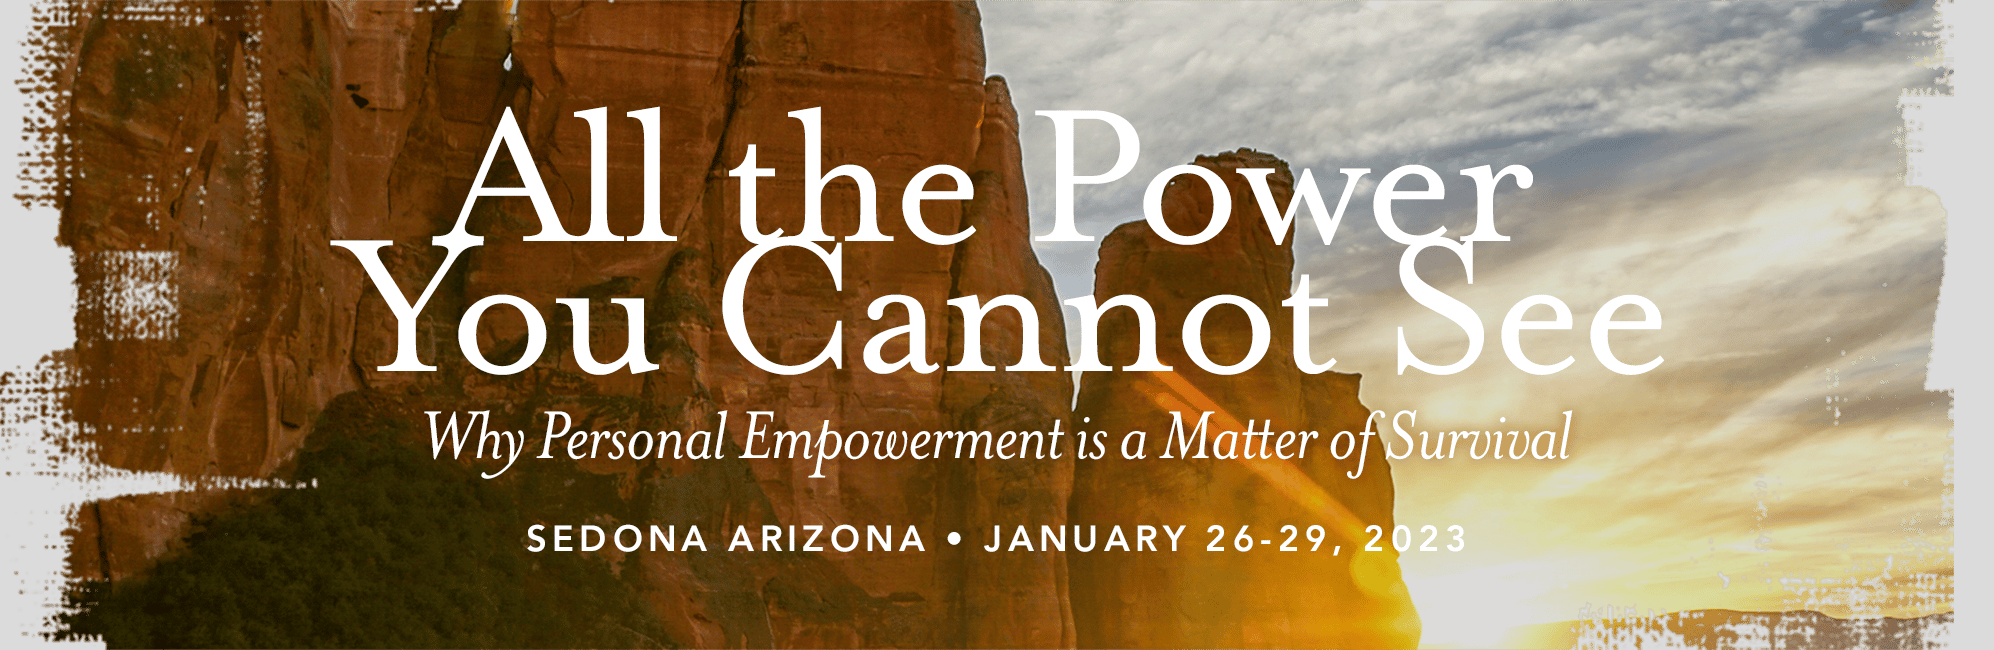 All the Power You Cannot See - Why Personal Empowerment is a Matter of Survival. Sedona Arizona, Jan 26-29, 2023